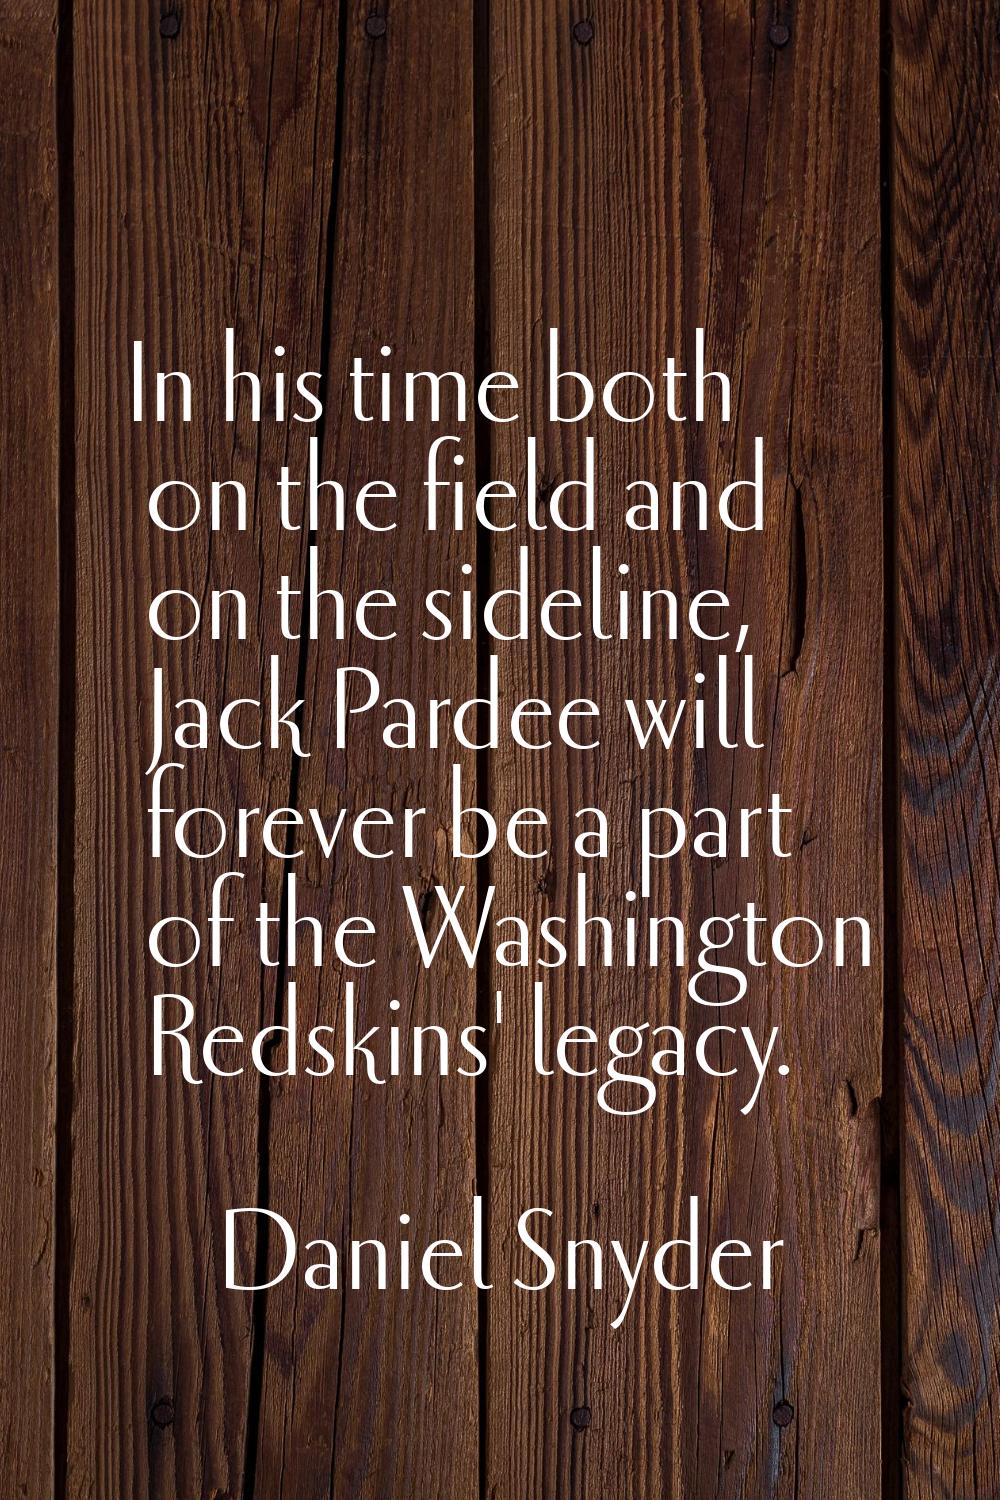 In his time both on the field and on the sideline, Jack Pardee will forever be a part of the Washin